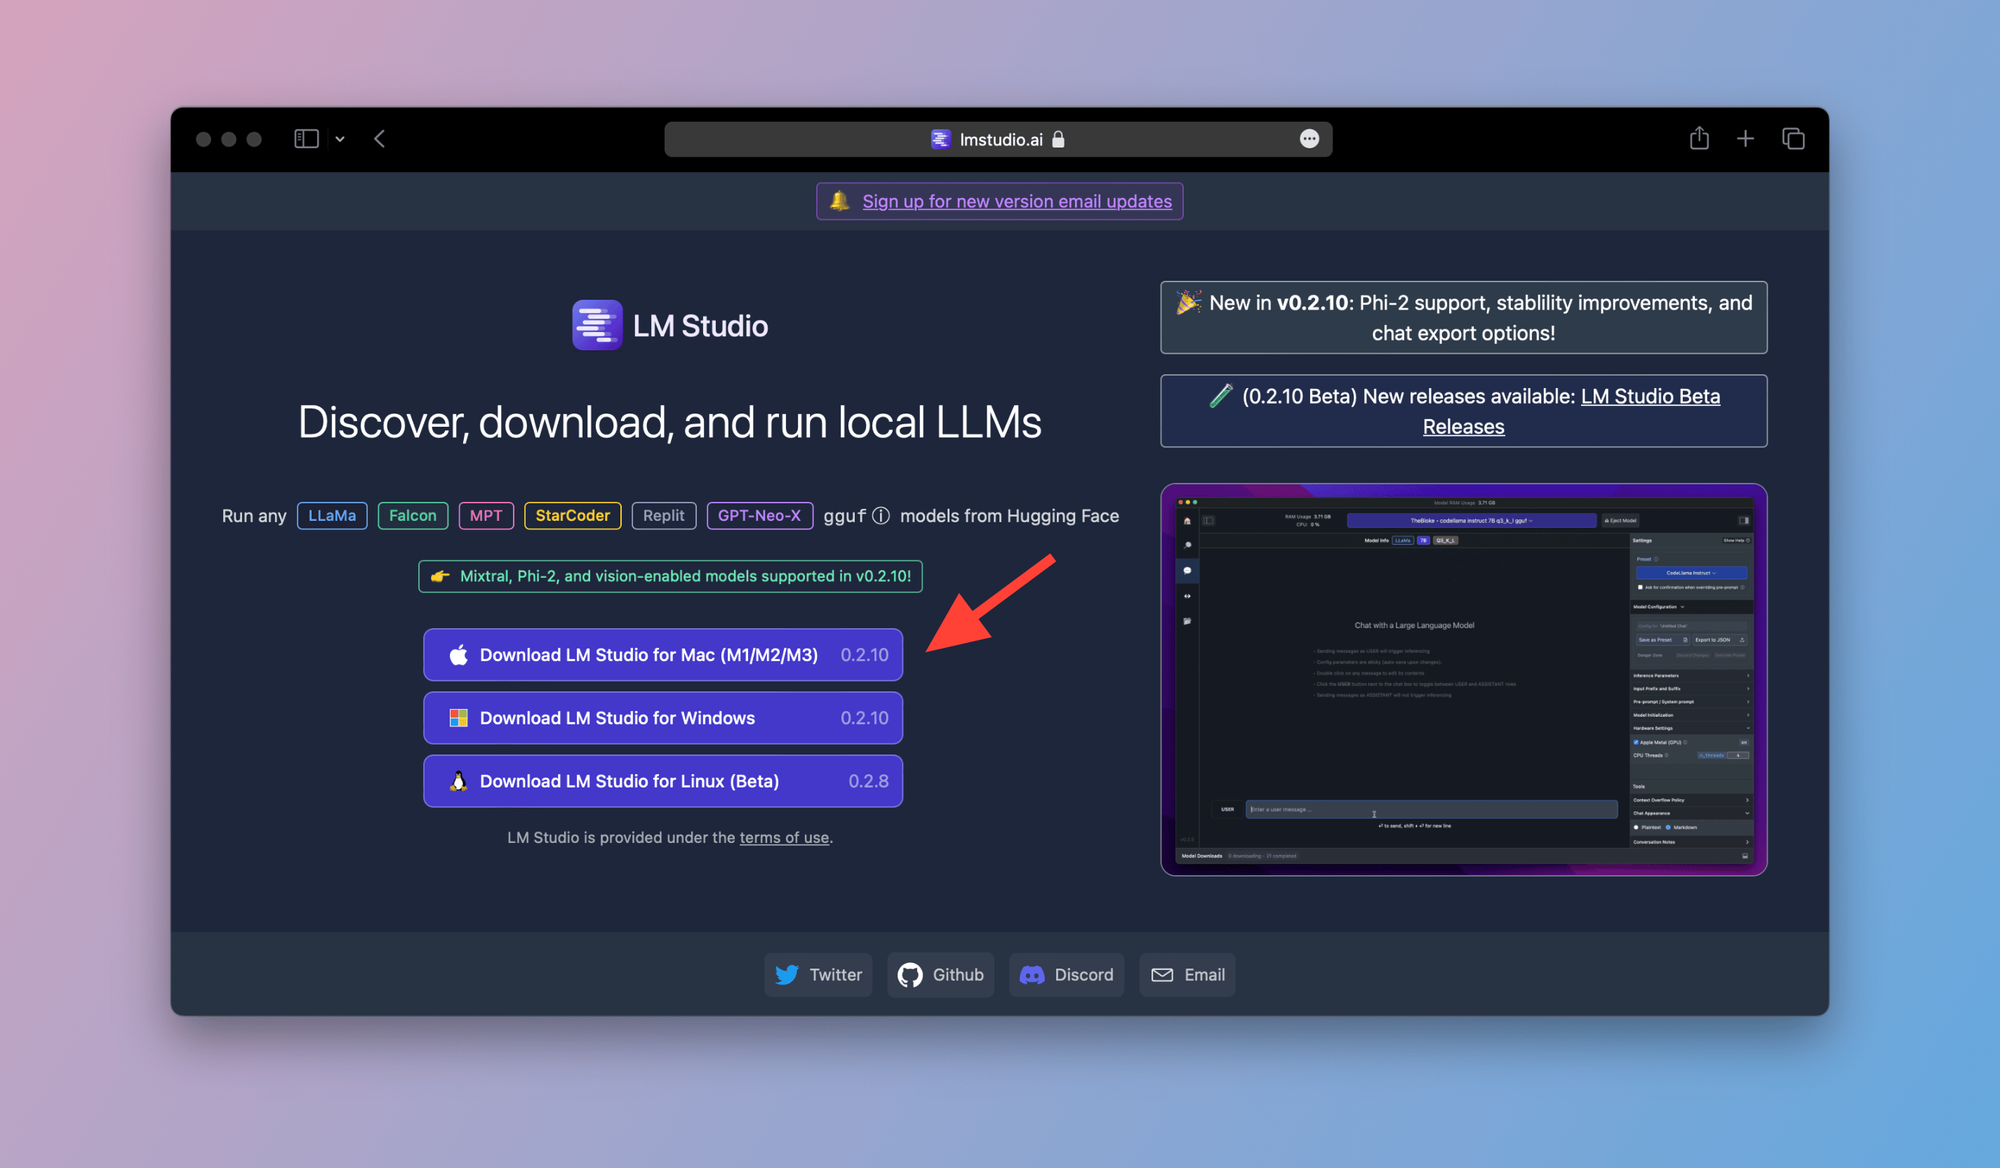 Choose your OS from the list to download LM Studio